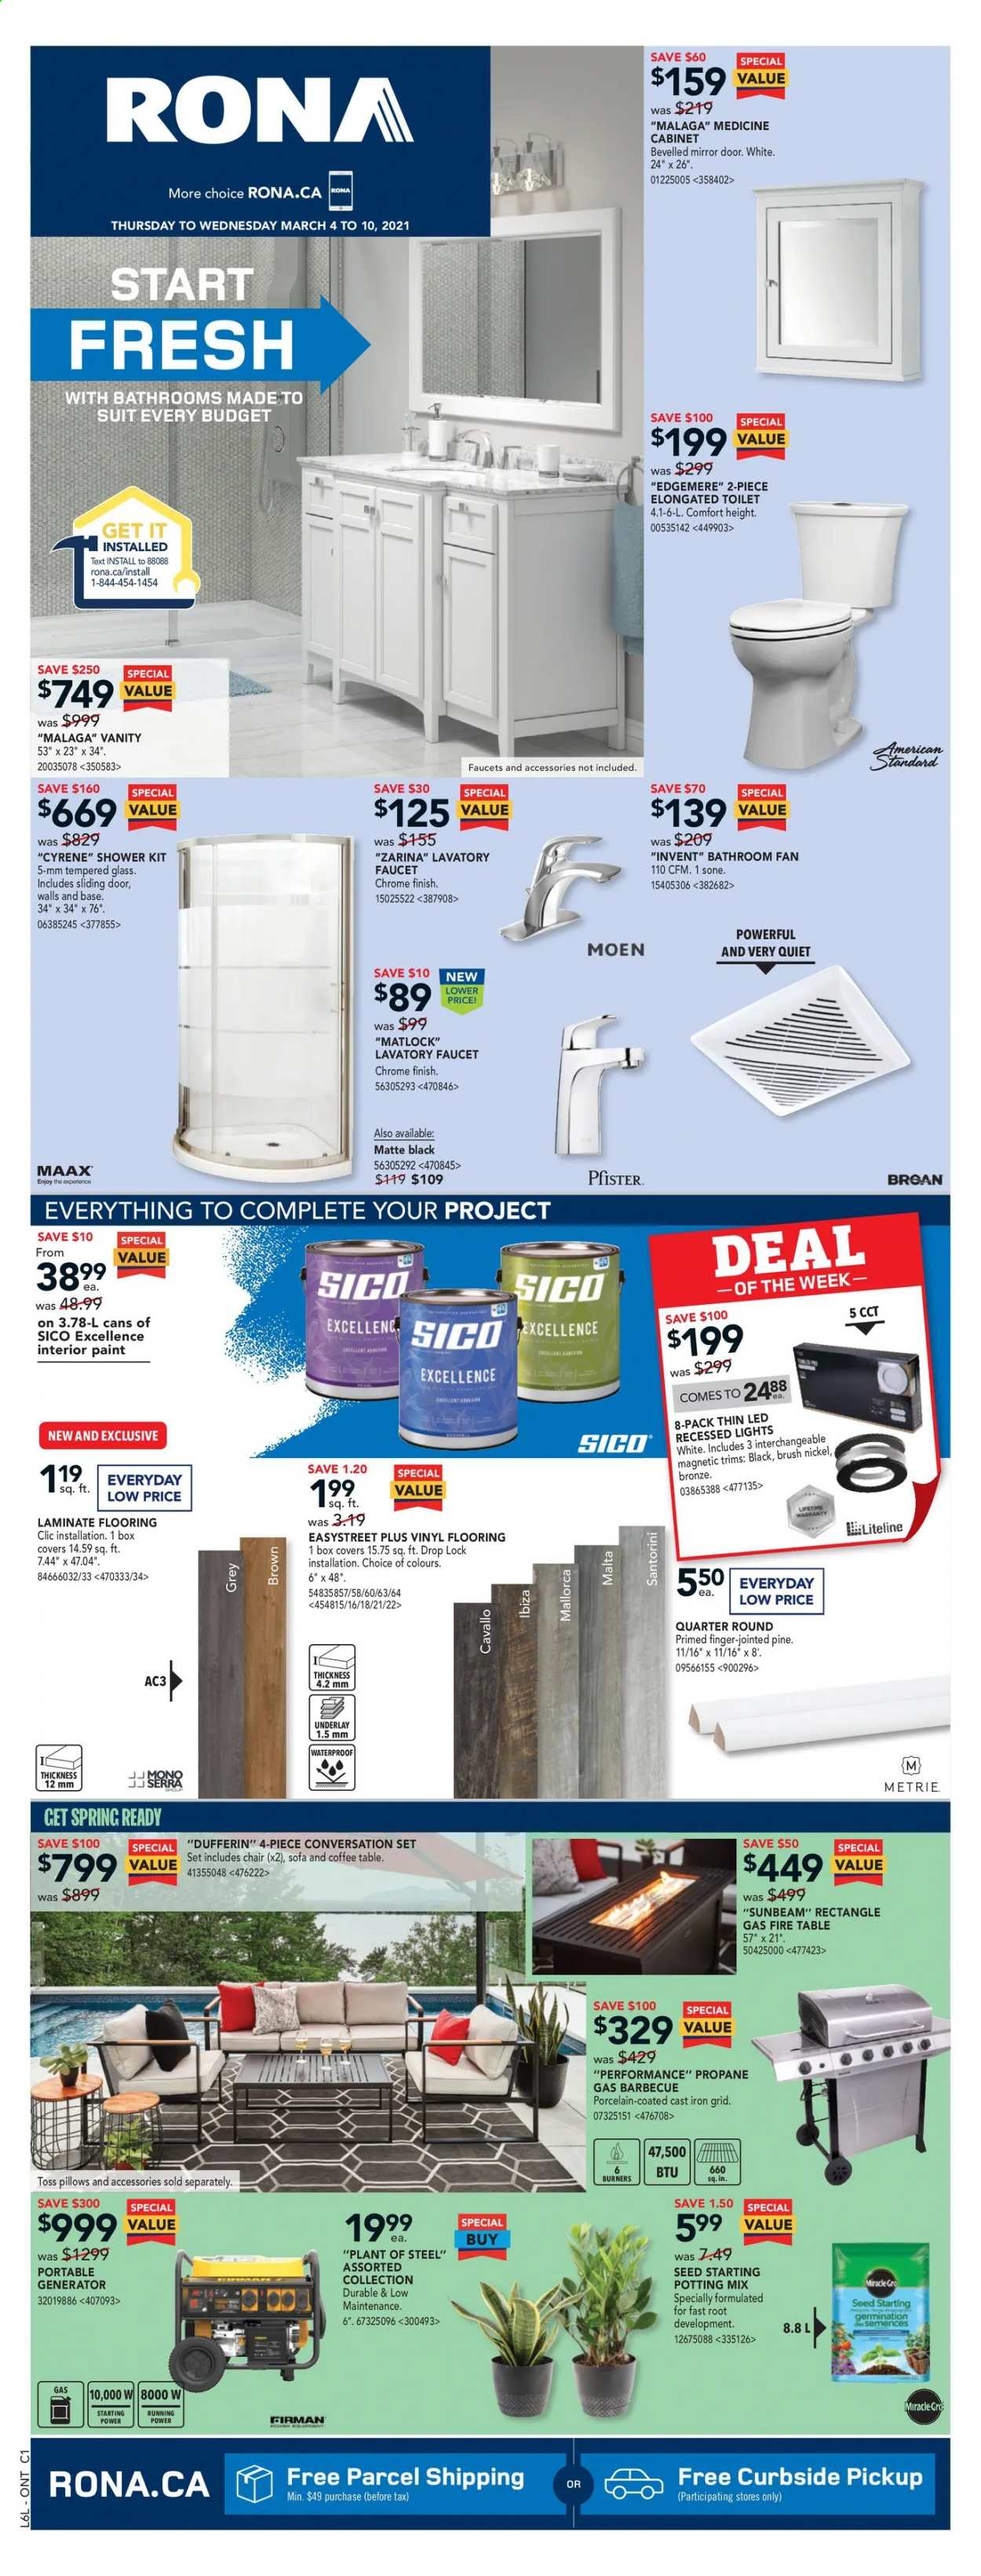 thumbnail - RONA Flyer - March 04, 2021 - March 10, 2021 - Sales products - Sunbeam, cabinet, table, chair, sofa, coffee table, vanity, mirror, toilet, faucet, paint, flooring, laminate floor, sliding door, generator, plant seeds, potting mix, pillow. Page 1.